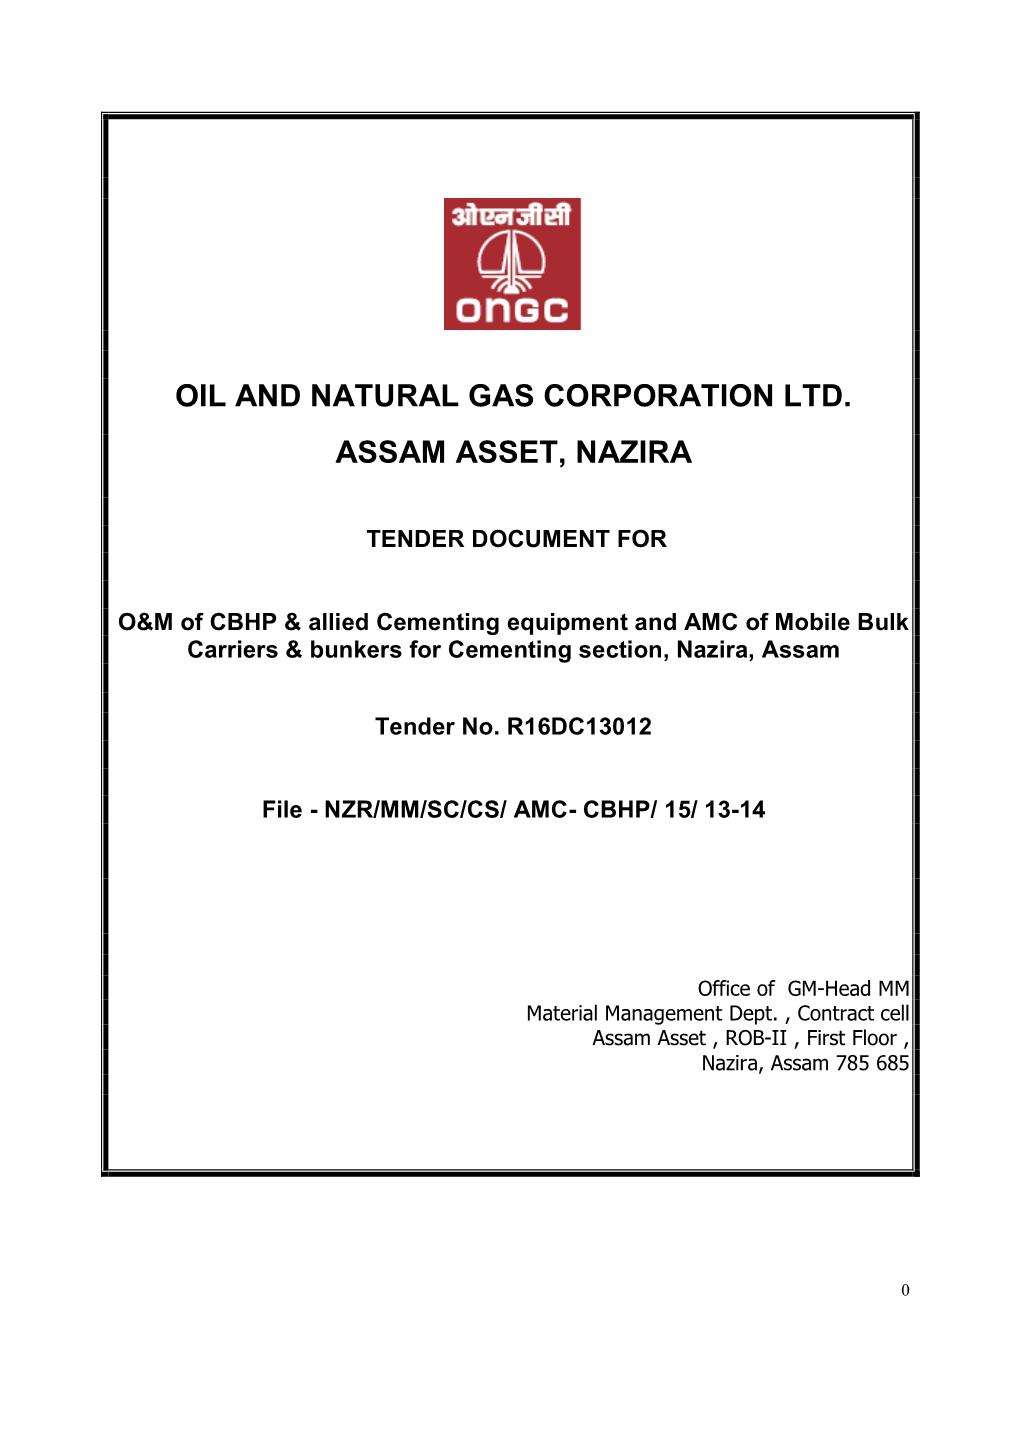 Oil and Natural Gas Corporation Ltd. Assam